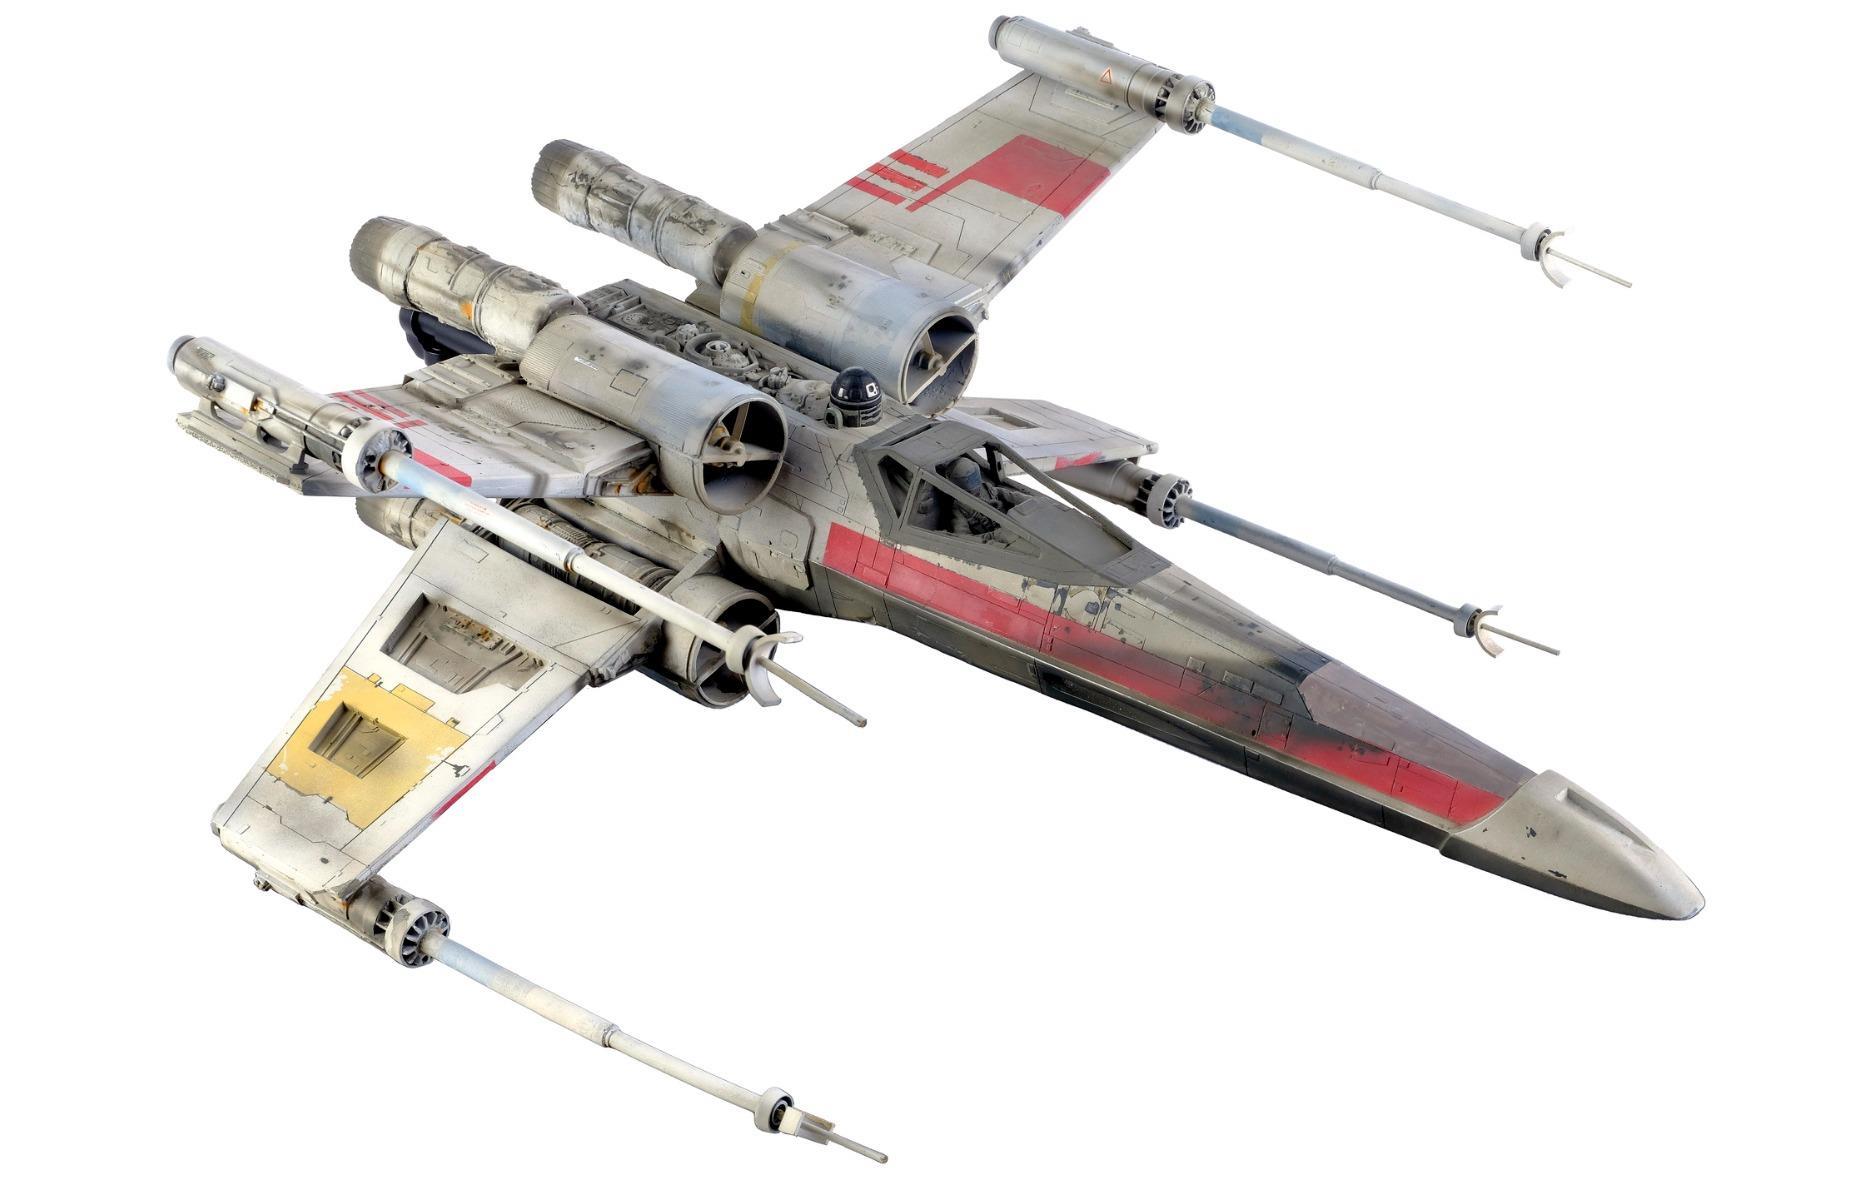 Star Wars: Episode IV – A New Hope (1977) X-Wing: $2.4 million (£2m)